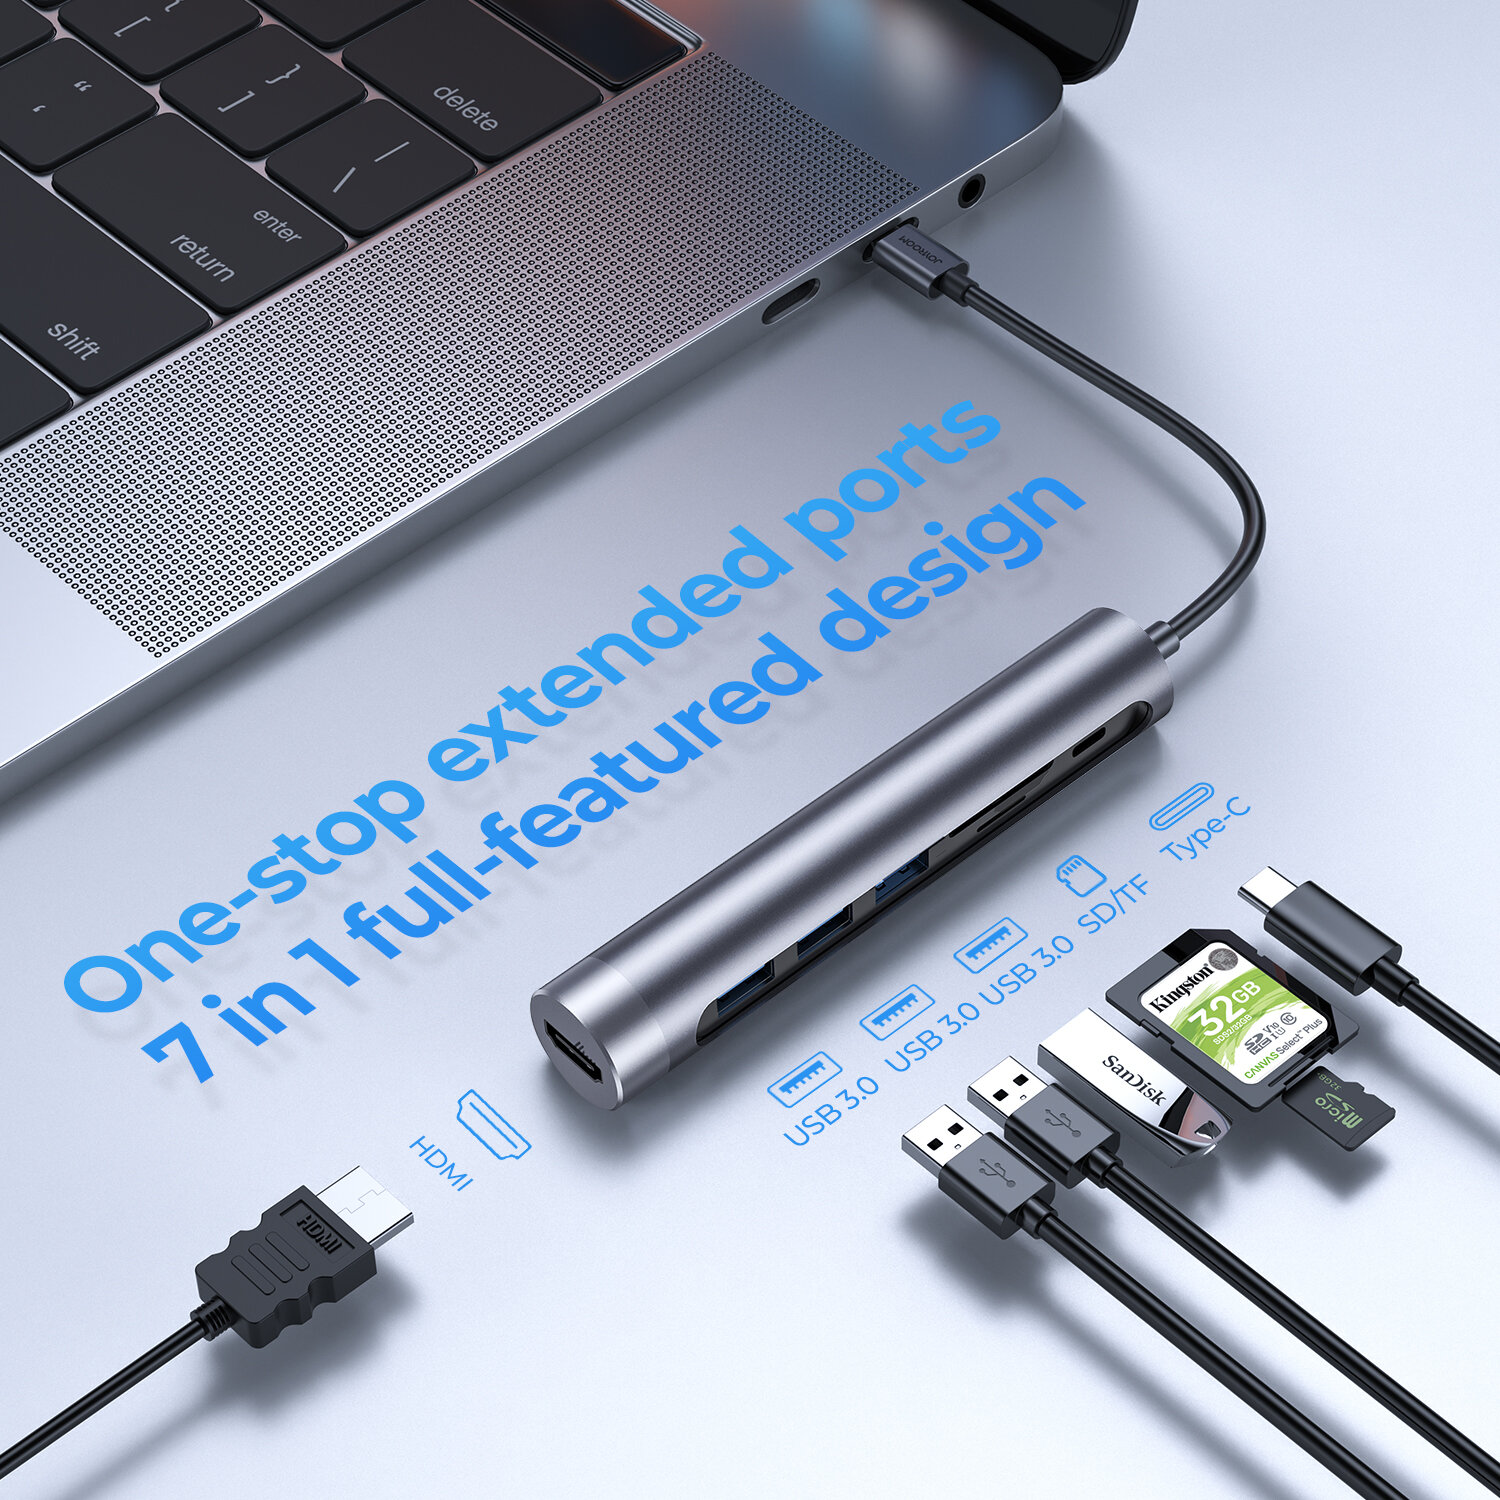 

Joyroom 7 In 1 Type-C Hub Docking Station Adapter with 3*USB3.0 + SD/ TF Card Slot + HDMI + PD Fast Charging